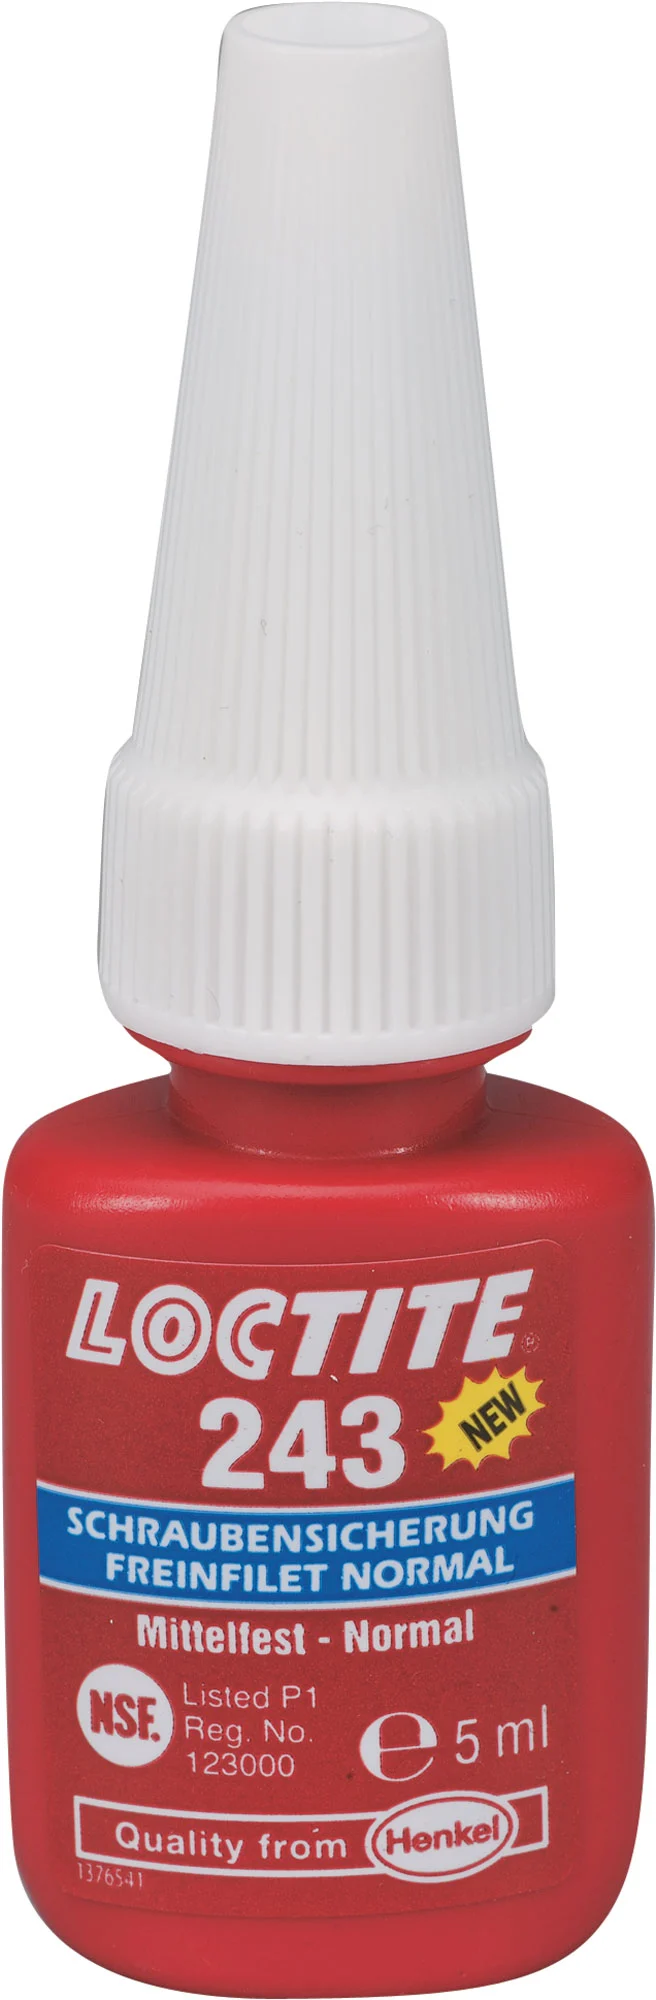 Freinfilet normal LOCTITE 243